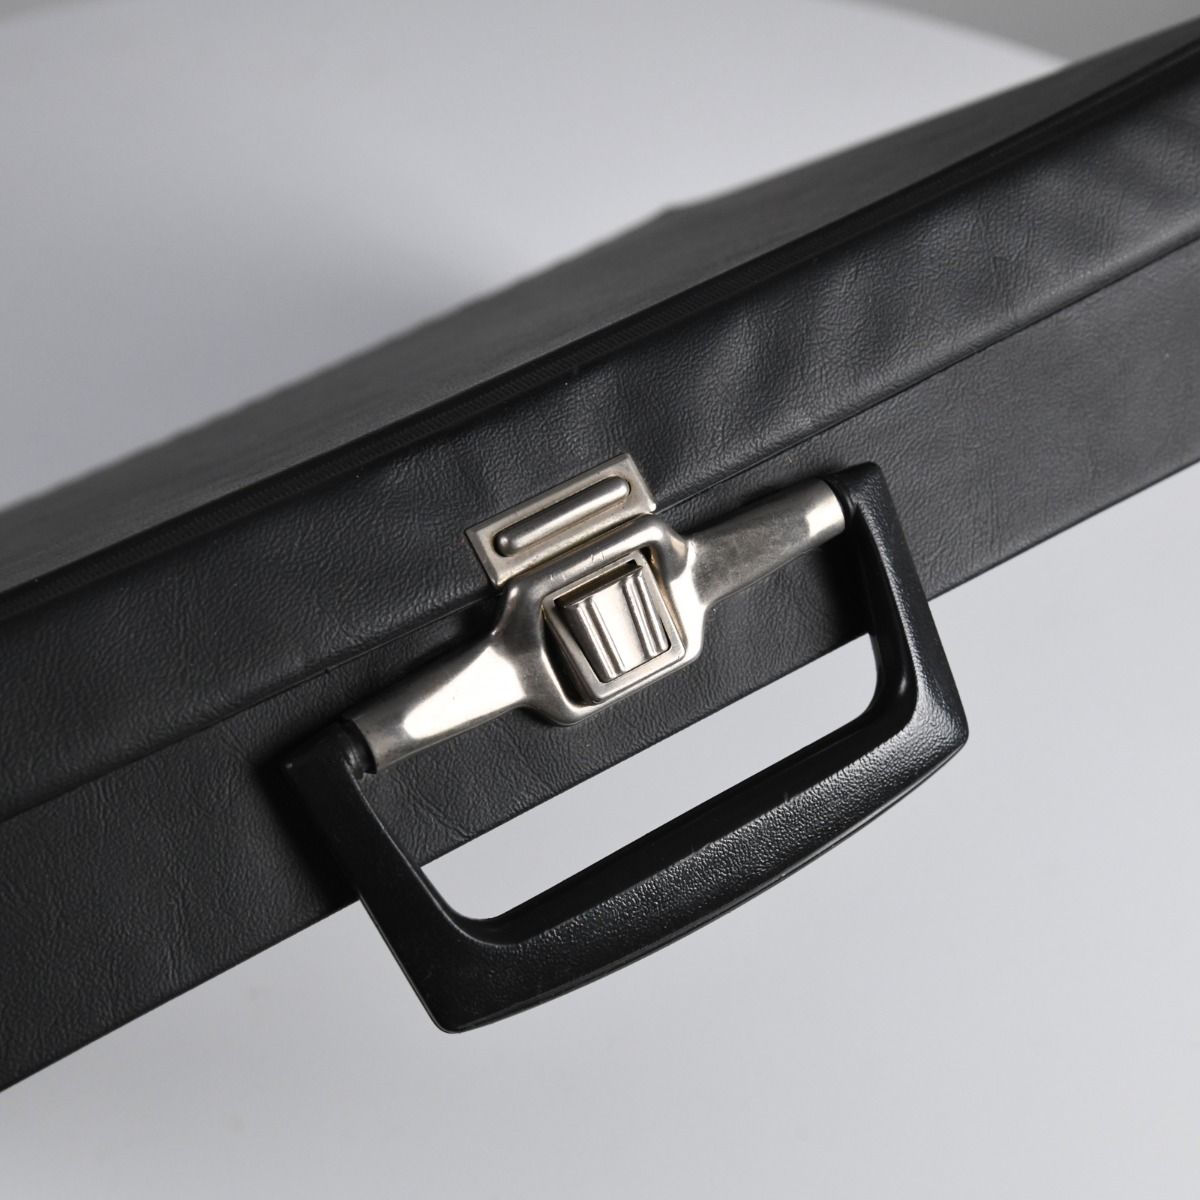 1970s Black Briefcase with Leather Effect